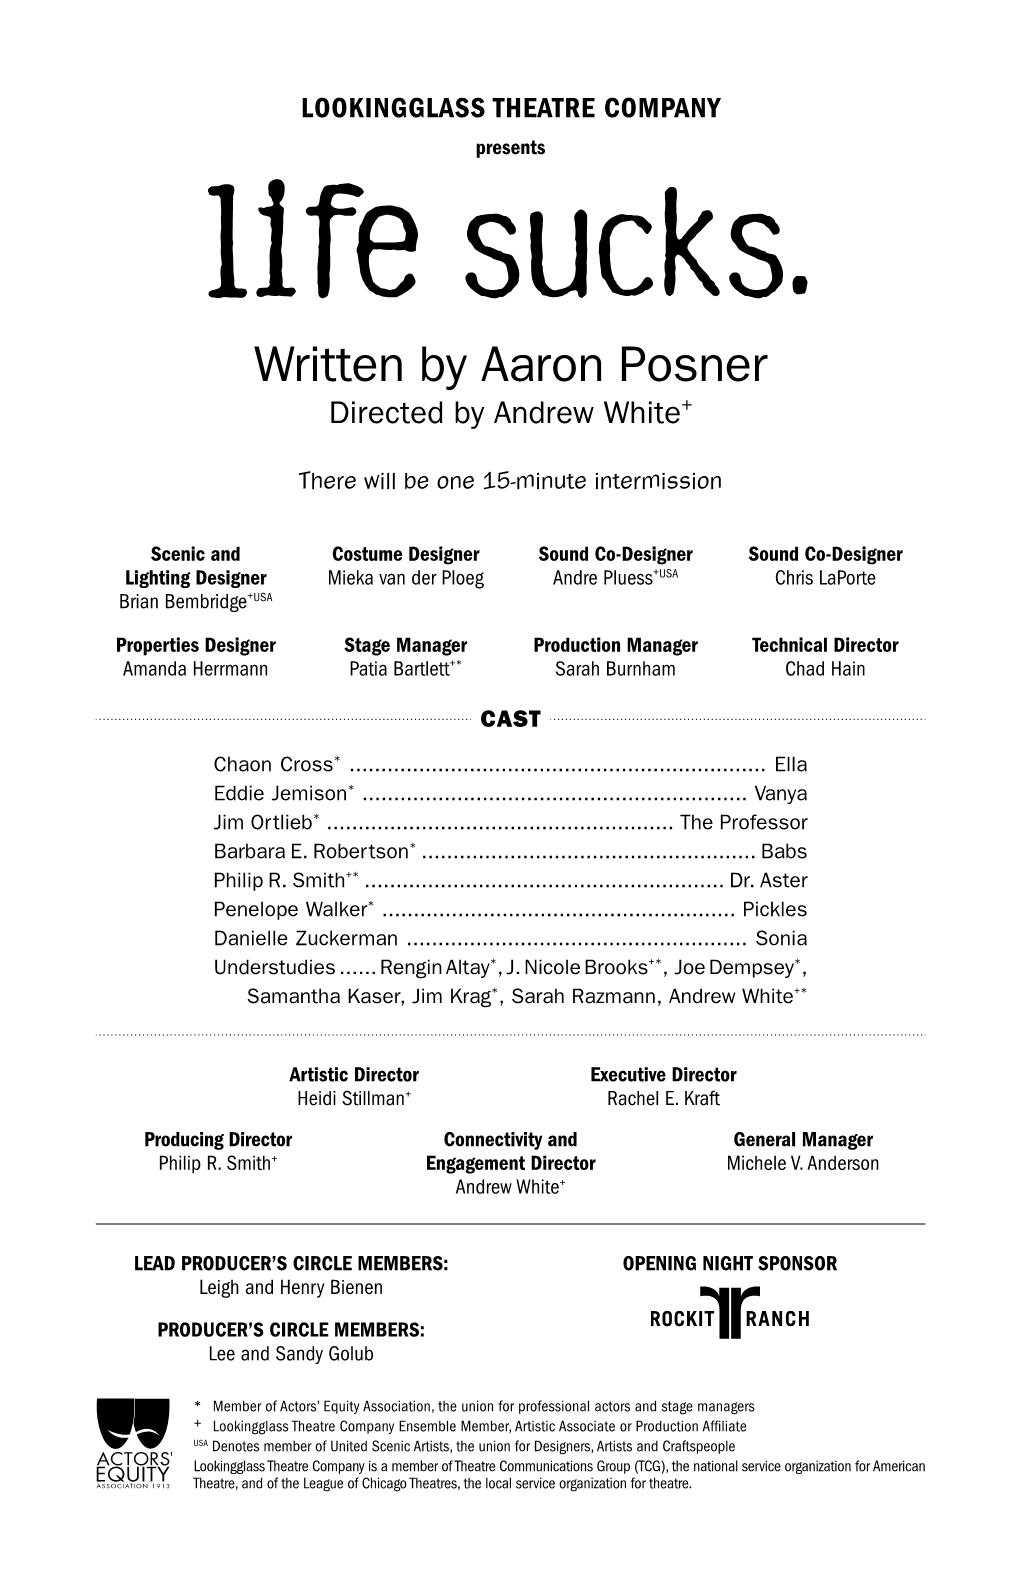 Written by Aaron Posner Directed by Andrew White+